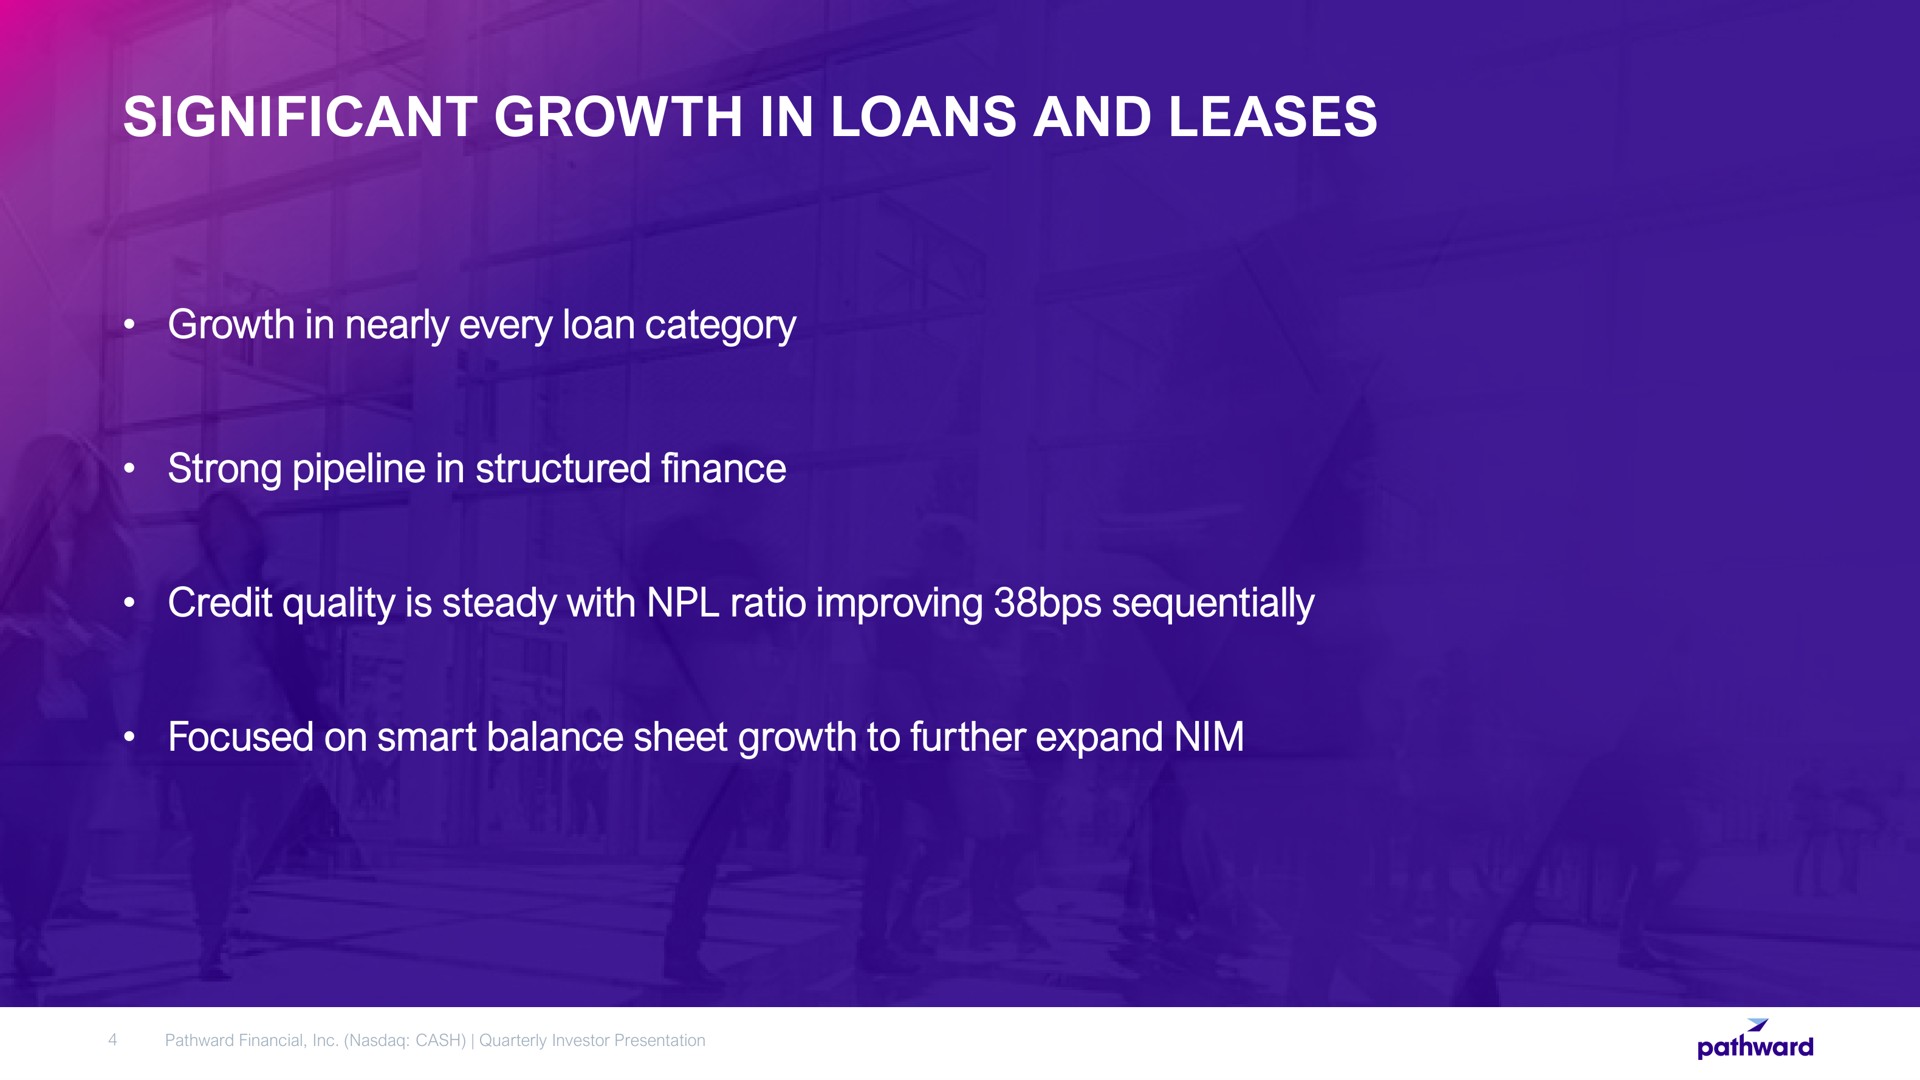 significant growth in loans and leases growth in nearly every loan category strong pipeline in structured finance credit quality is steady with ratio improving sequentially focused on smart balance sheet growth to further expand nim | Pathward Financial